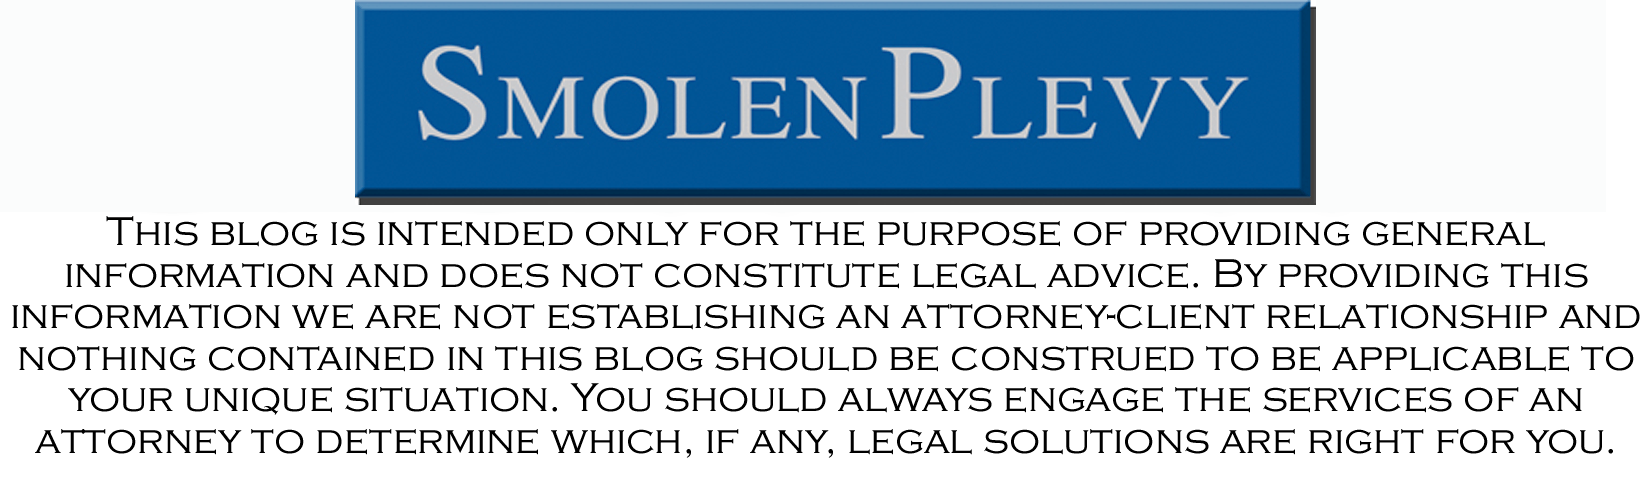 This blog is intended only for the purpose of providing general information and does not constitute legal advice. By providing this information we are not establishing an attorney-client relationship and nothing contained in this blog should be construed to be applicable to your unique situation. You should always engage the services of an attorney to determine which, if any, legal solutions are right for you.